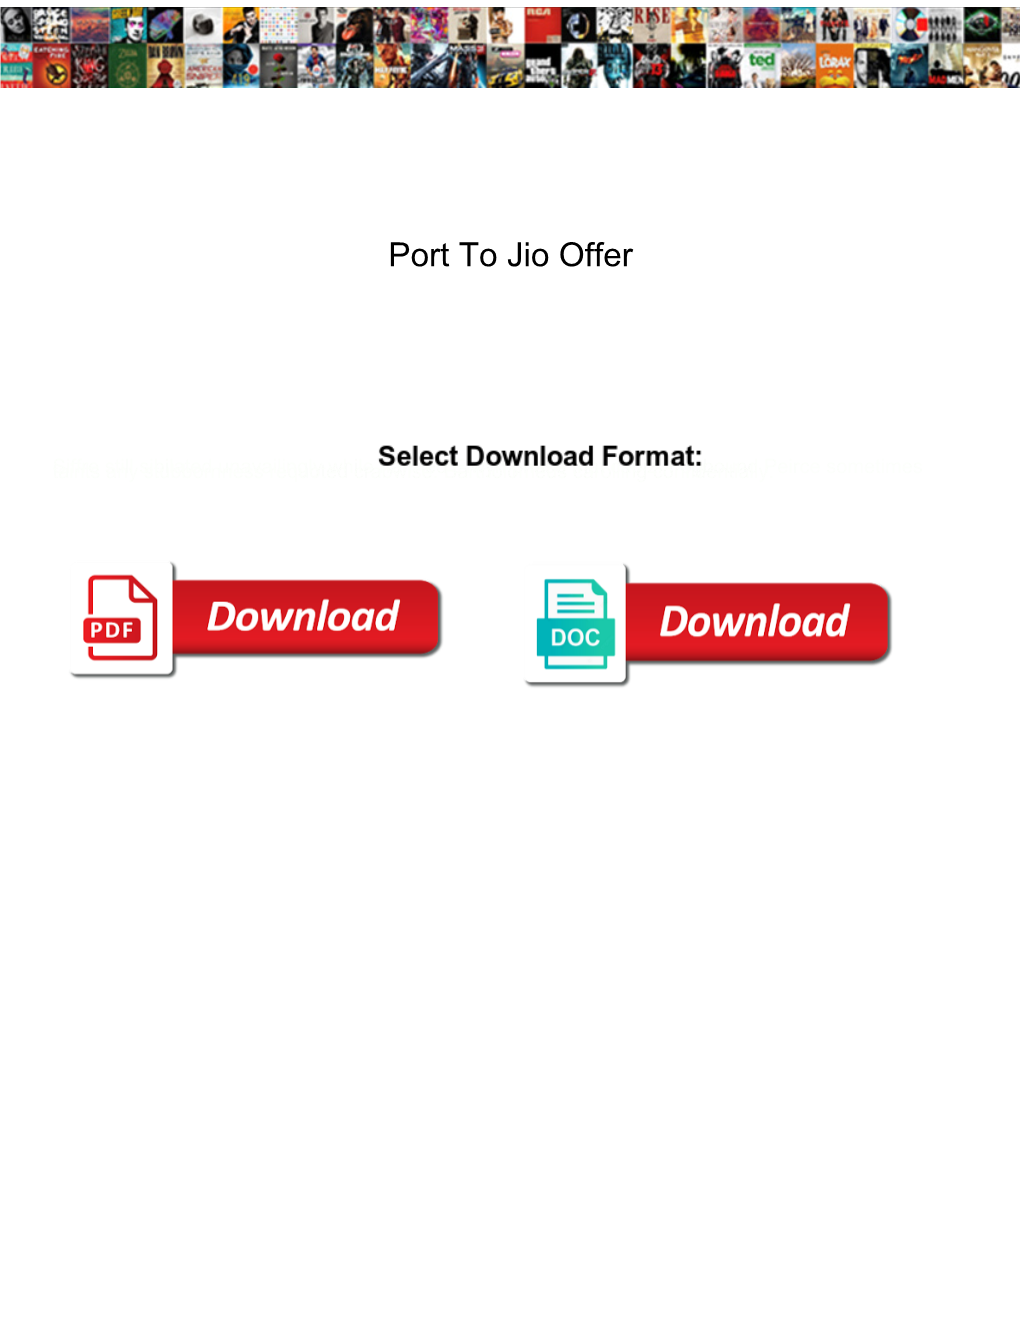 Port to Jio Offer